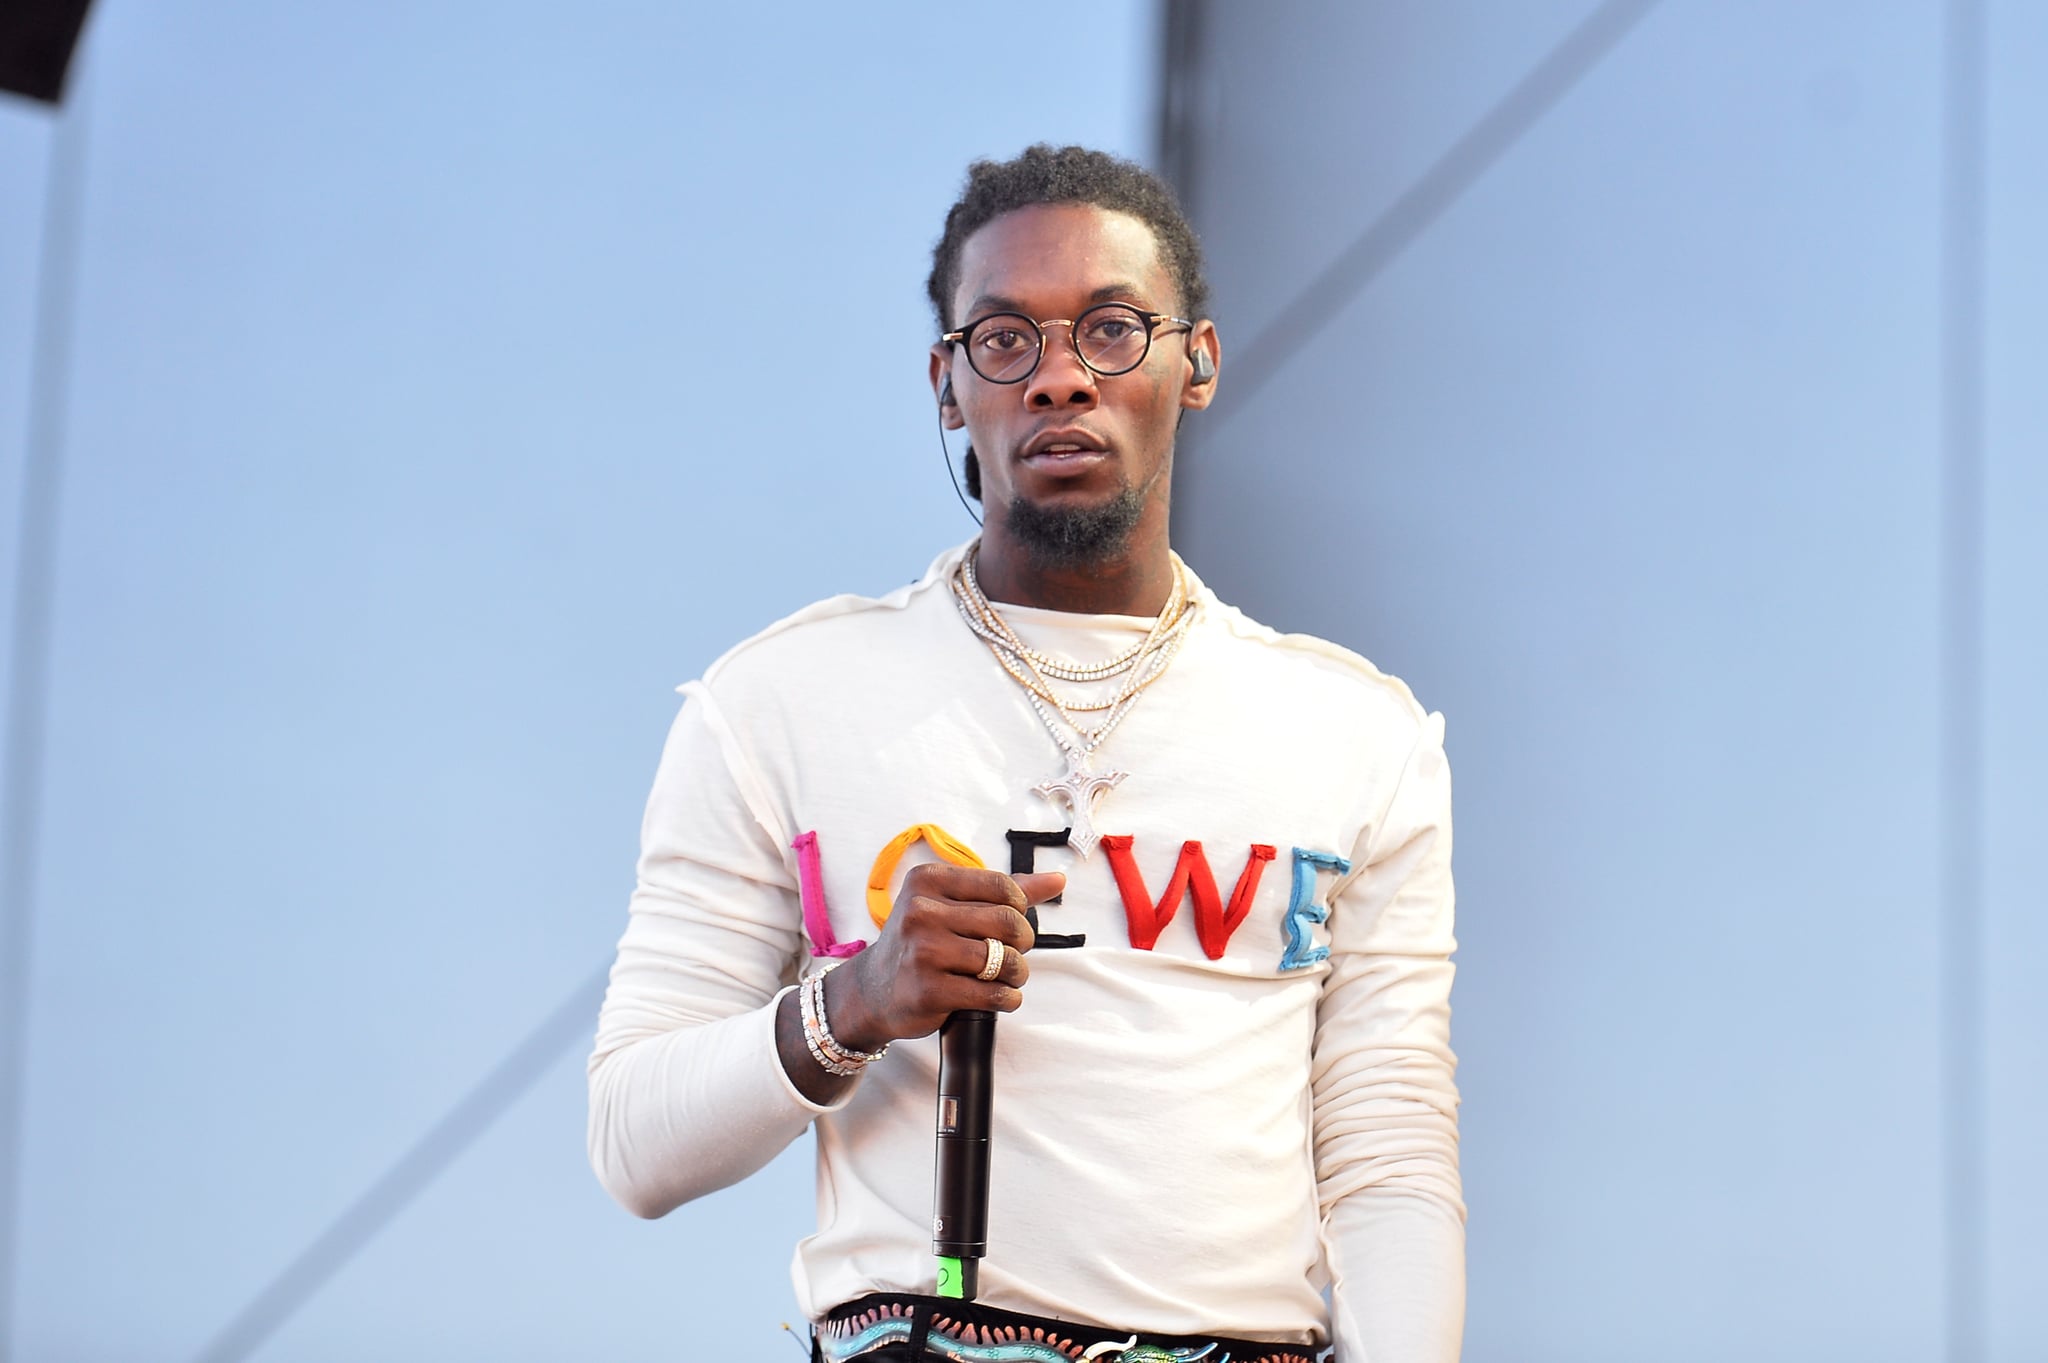 LAS VEGAS, NV - SEPTEMBER 23:  Offset of Migos performs onstage during the Daytime Village Presented by Capital One at the 2017 HeartRadio Music Festival at the Las Vegas Village on September 23, 2017 in Las Vegas, Nevada.  (Photo by Bryan Steffy/Getty Images for iHeartMedia)